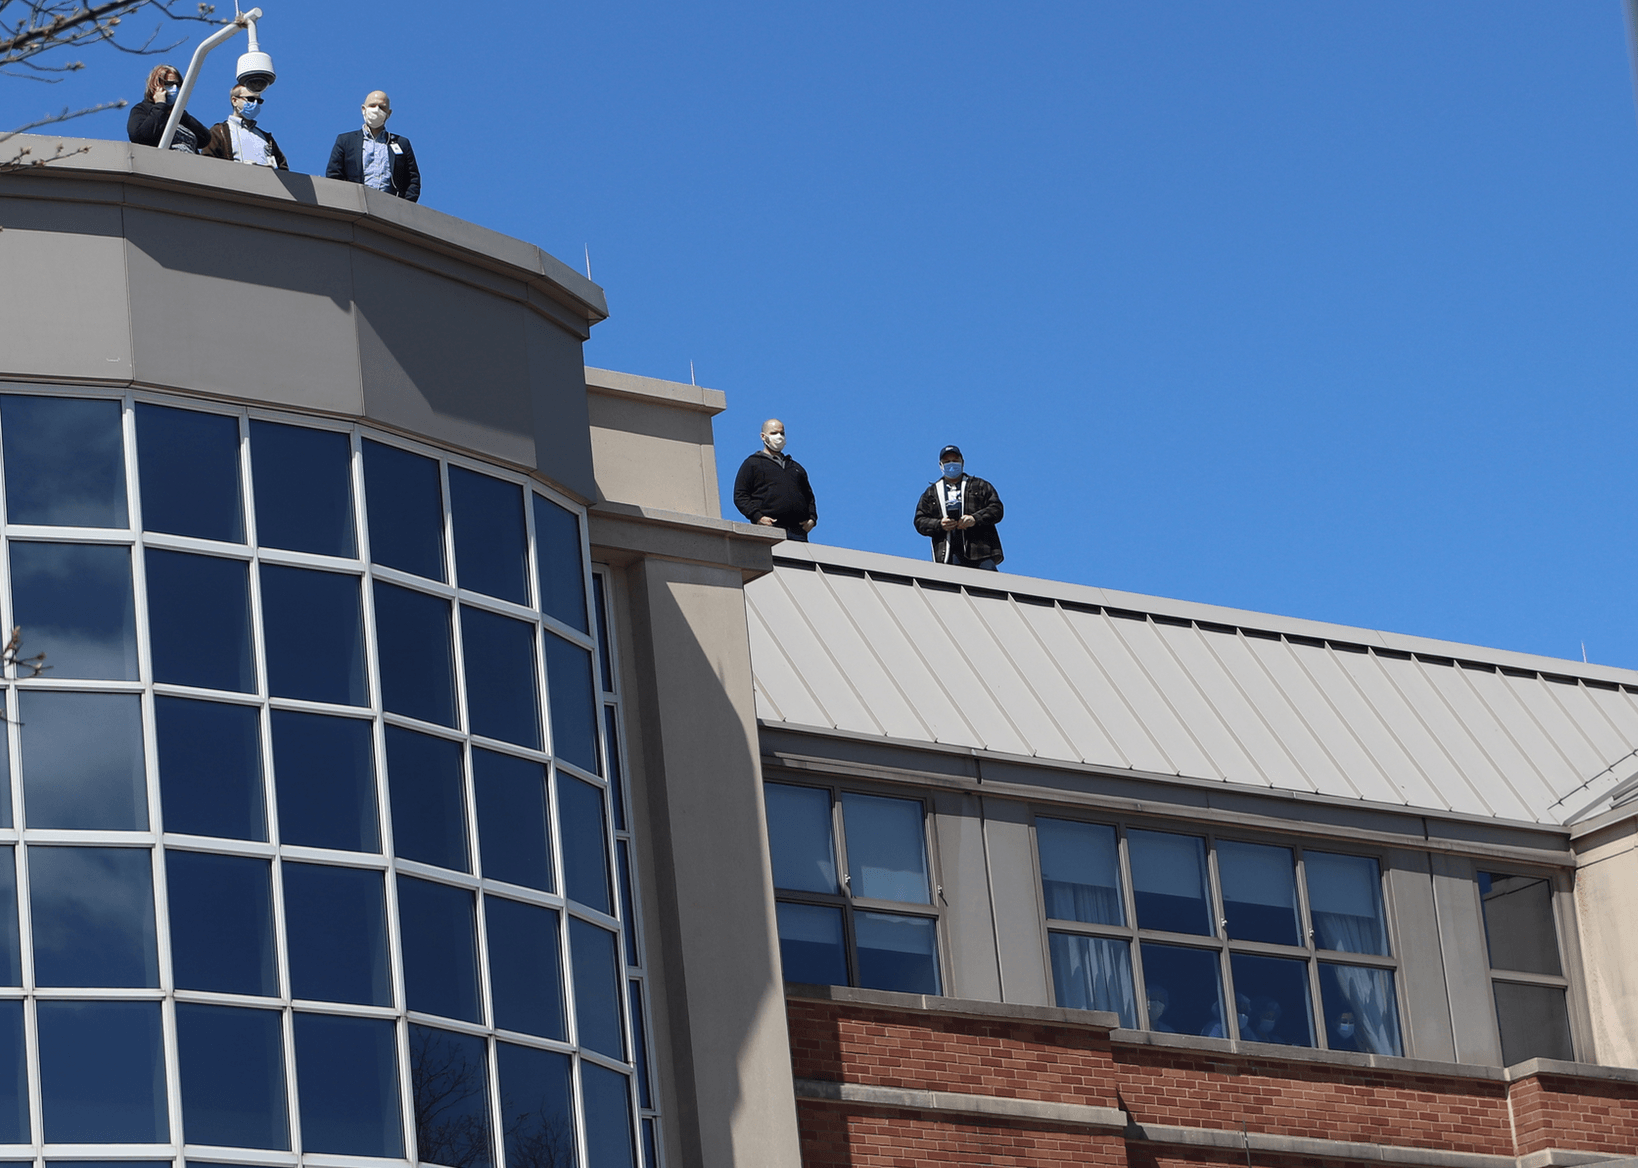 Hospital staff on the roof and peering out the windows of Greenwich Hospital. April 15, 2020 Photo: Leslie Yager